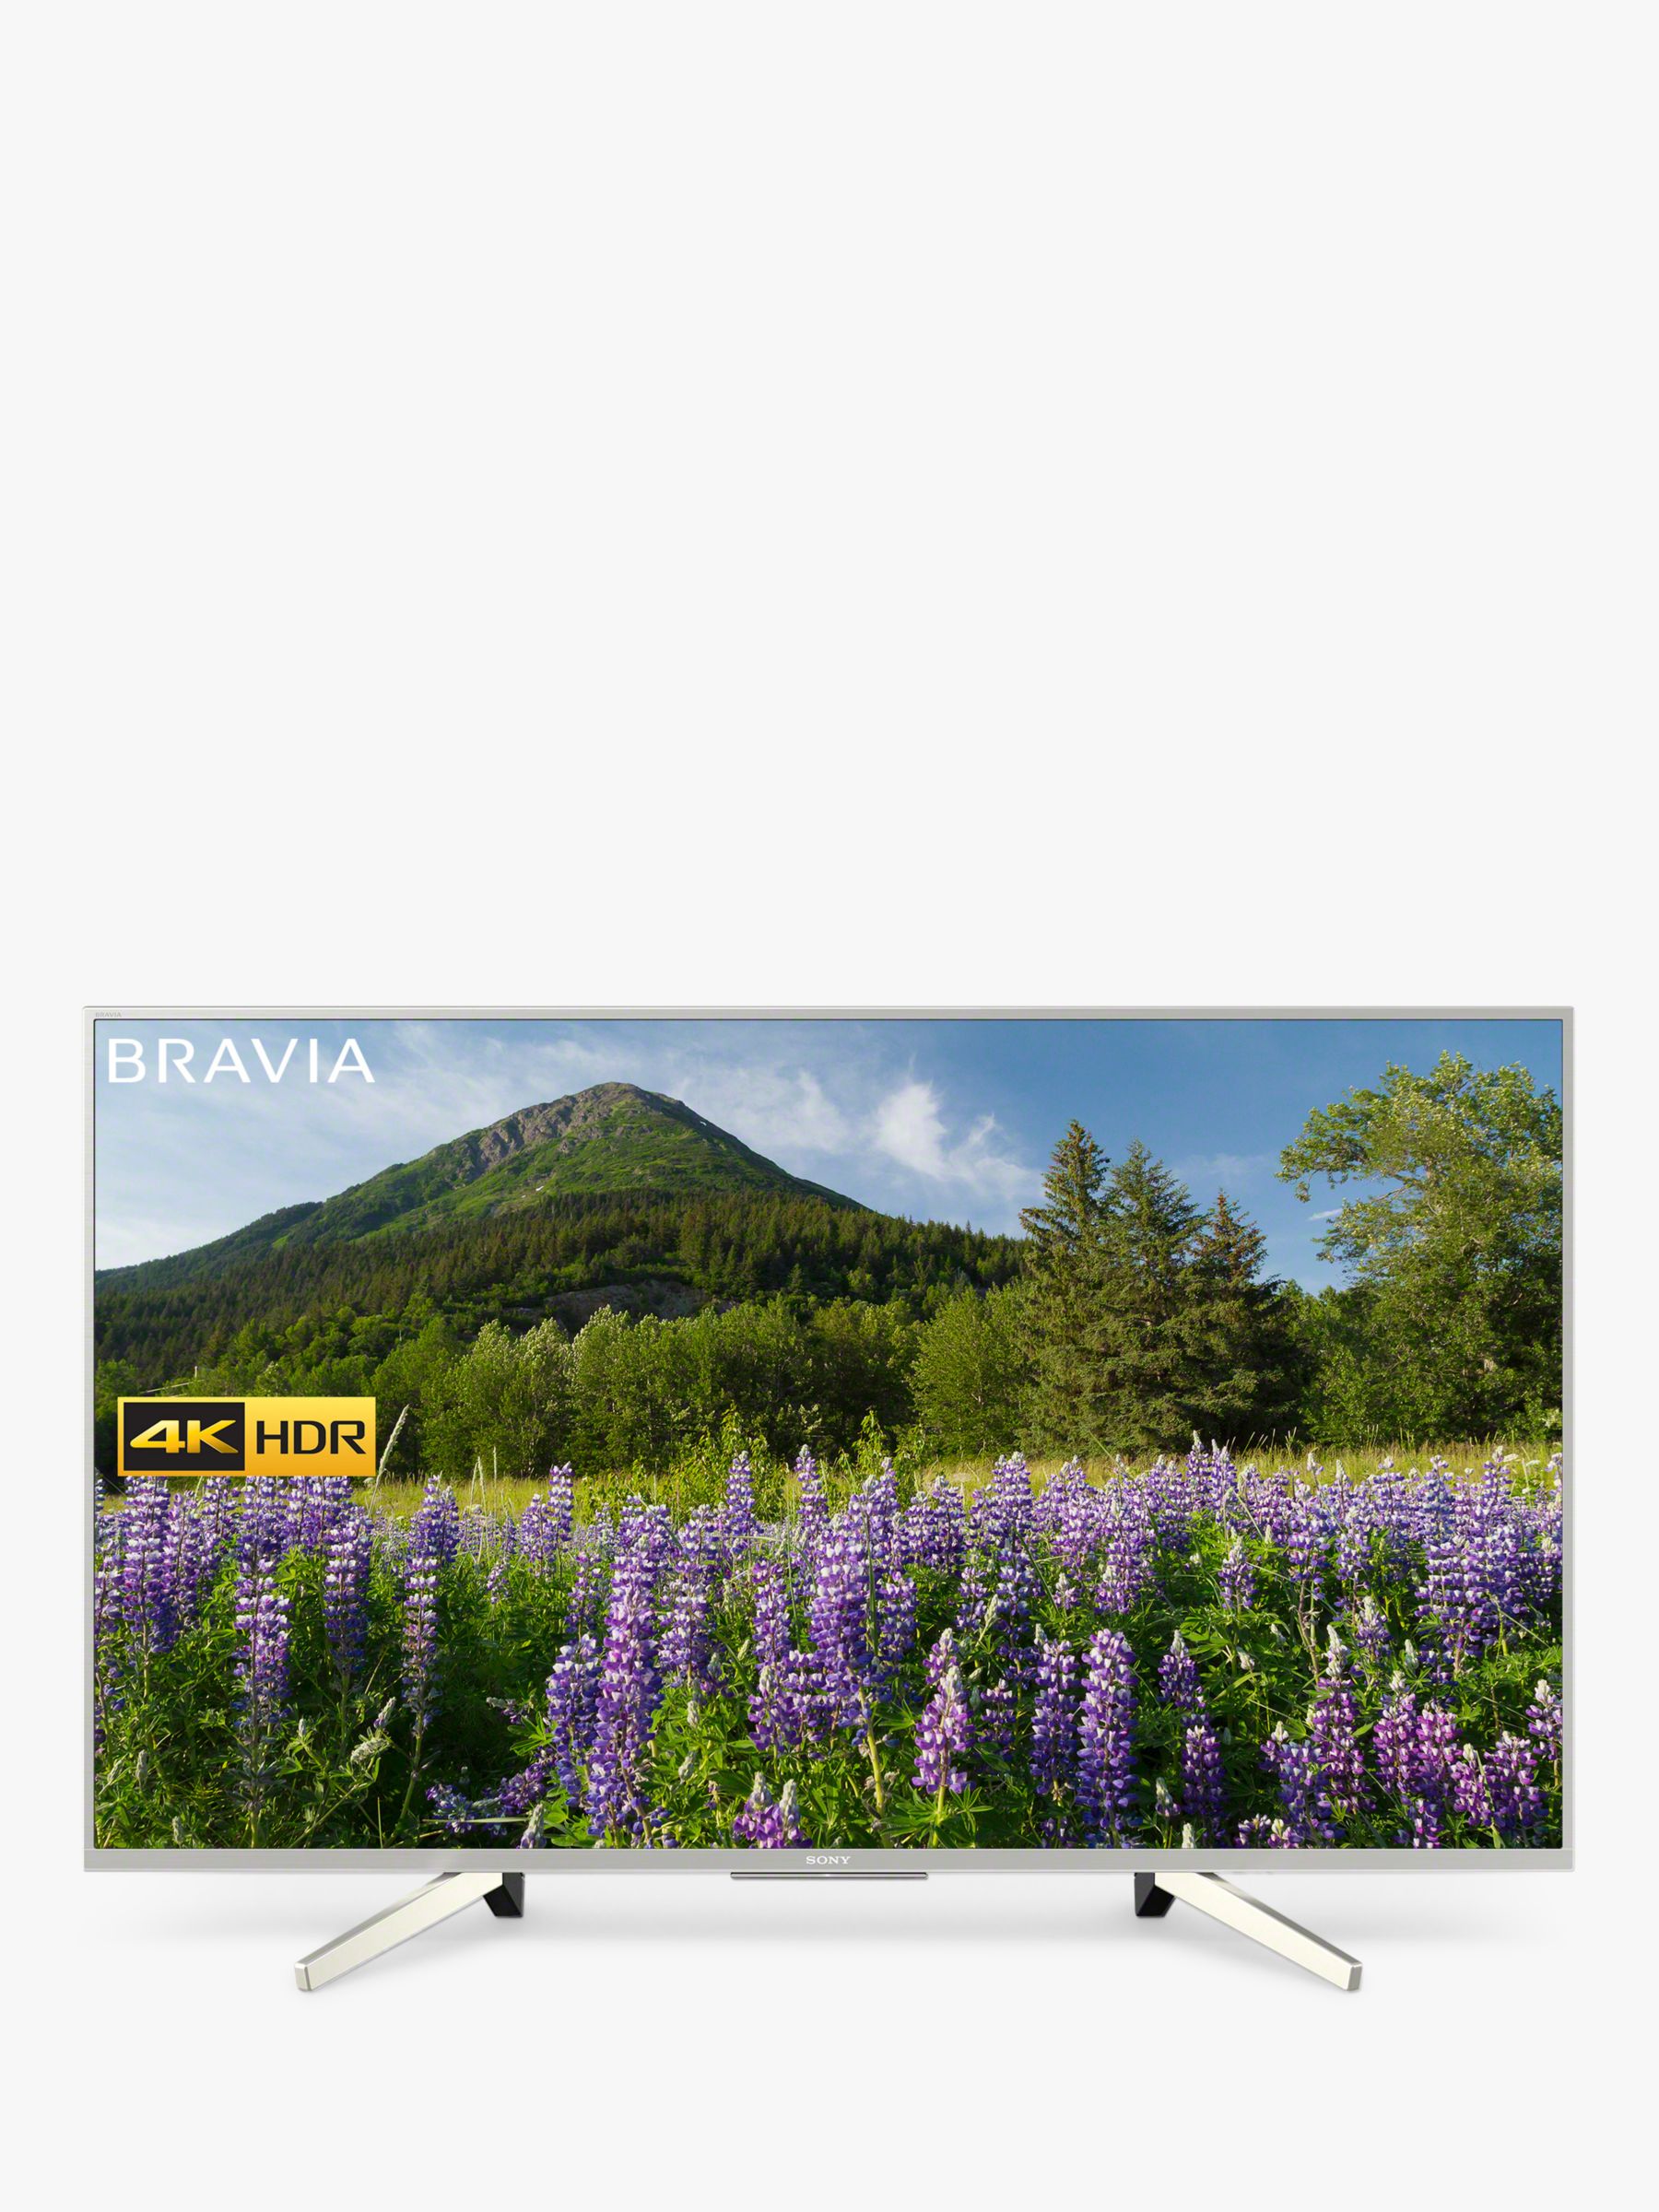 Sony Bravia KD43XF7073 LED HDR 4K Ultra HD Smart TV, 43 with Freeview Play & Cable Management, Silver